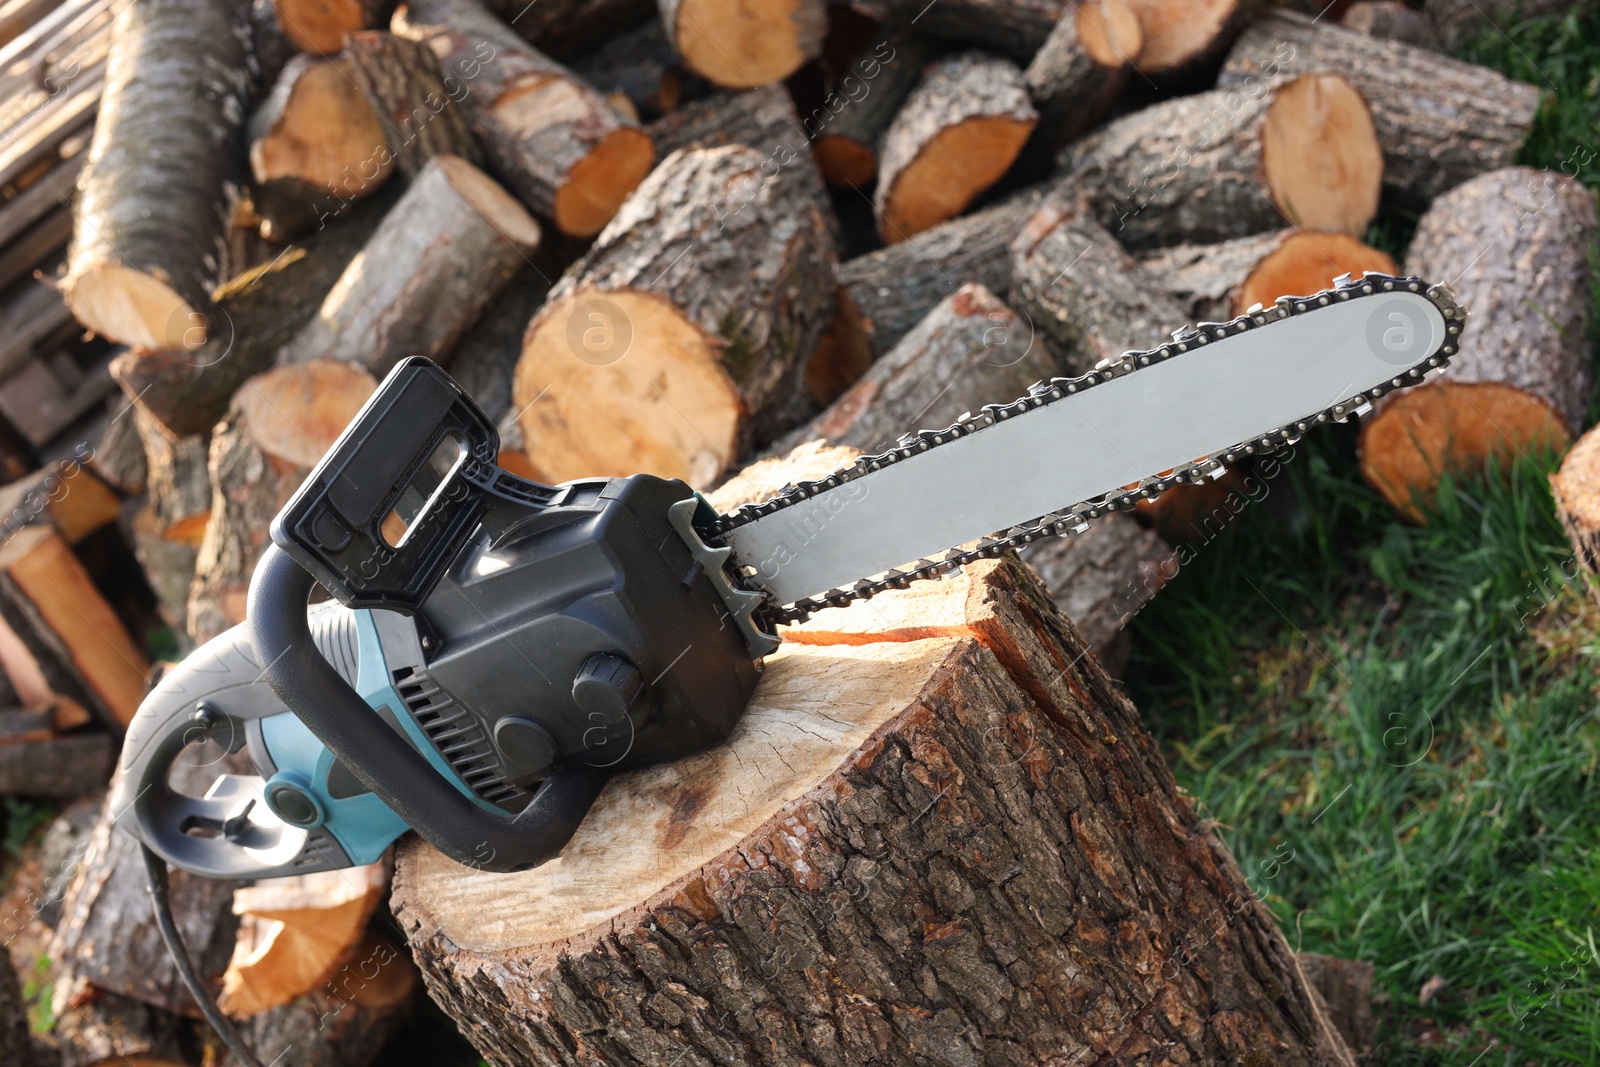 Photo of One modern saw on wooden log outdoors